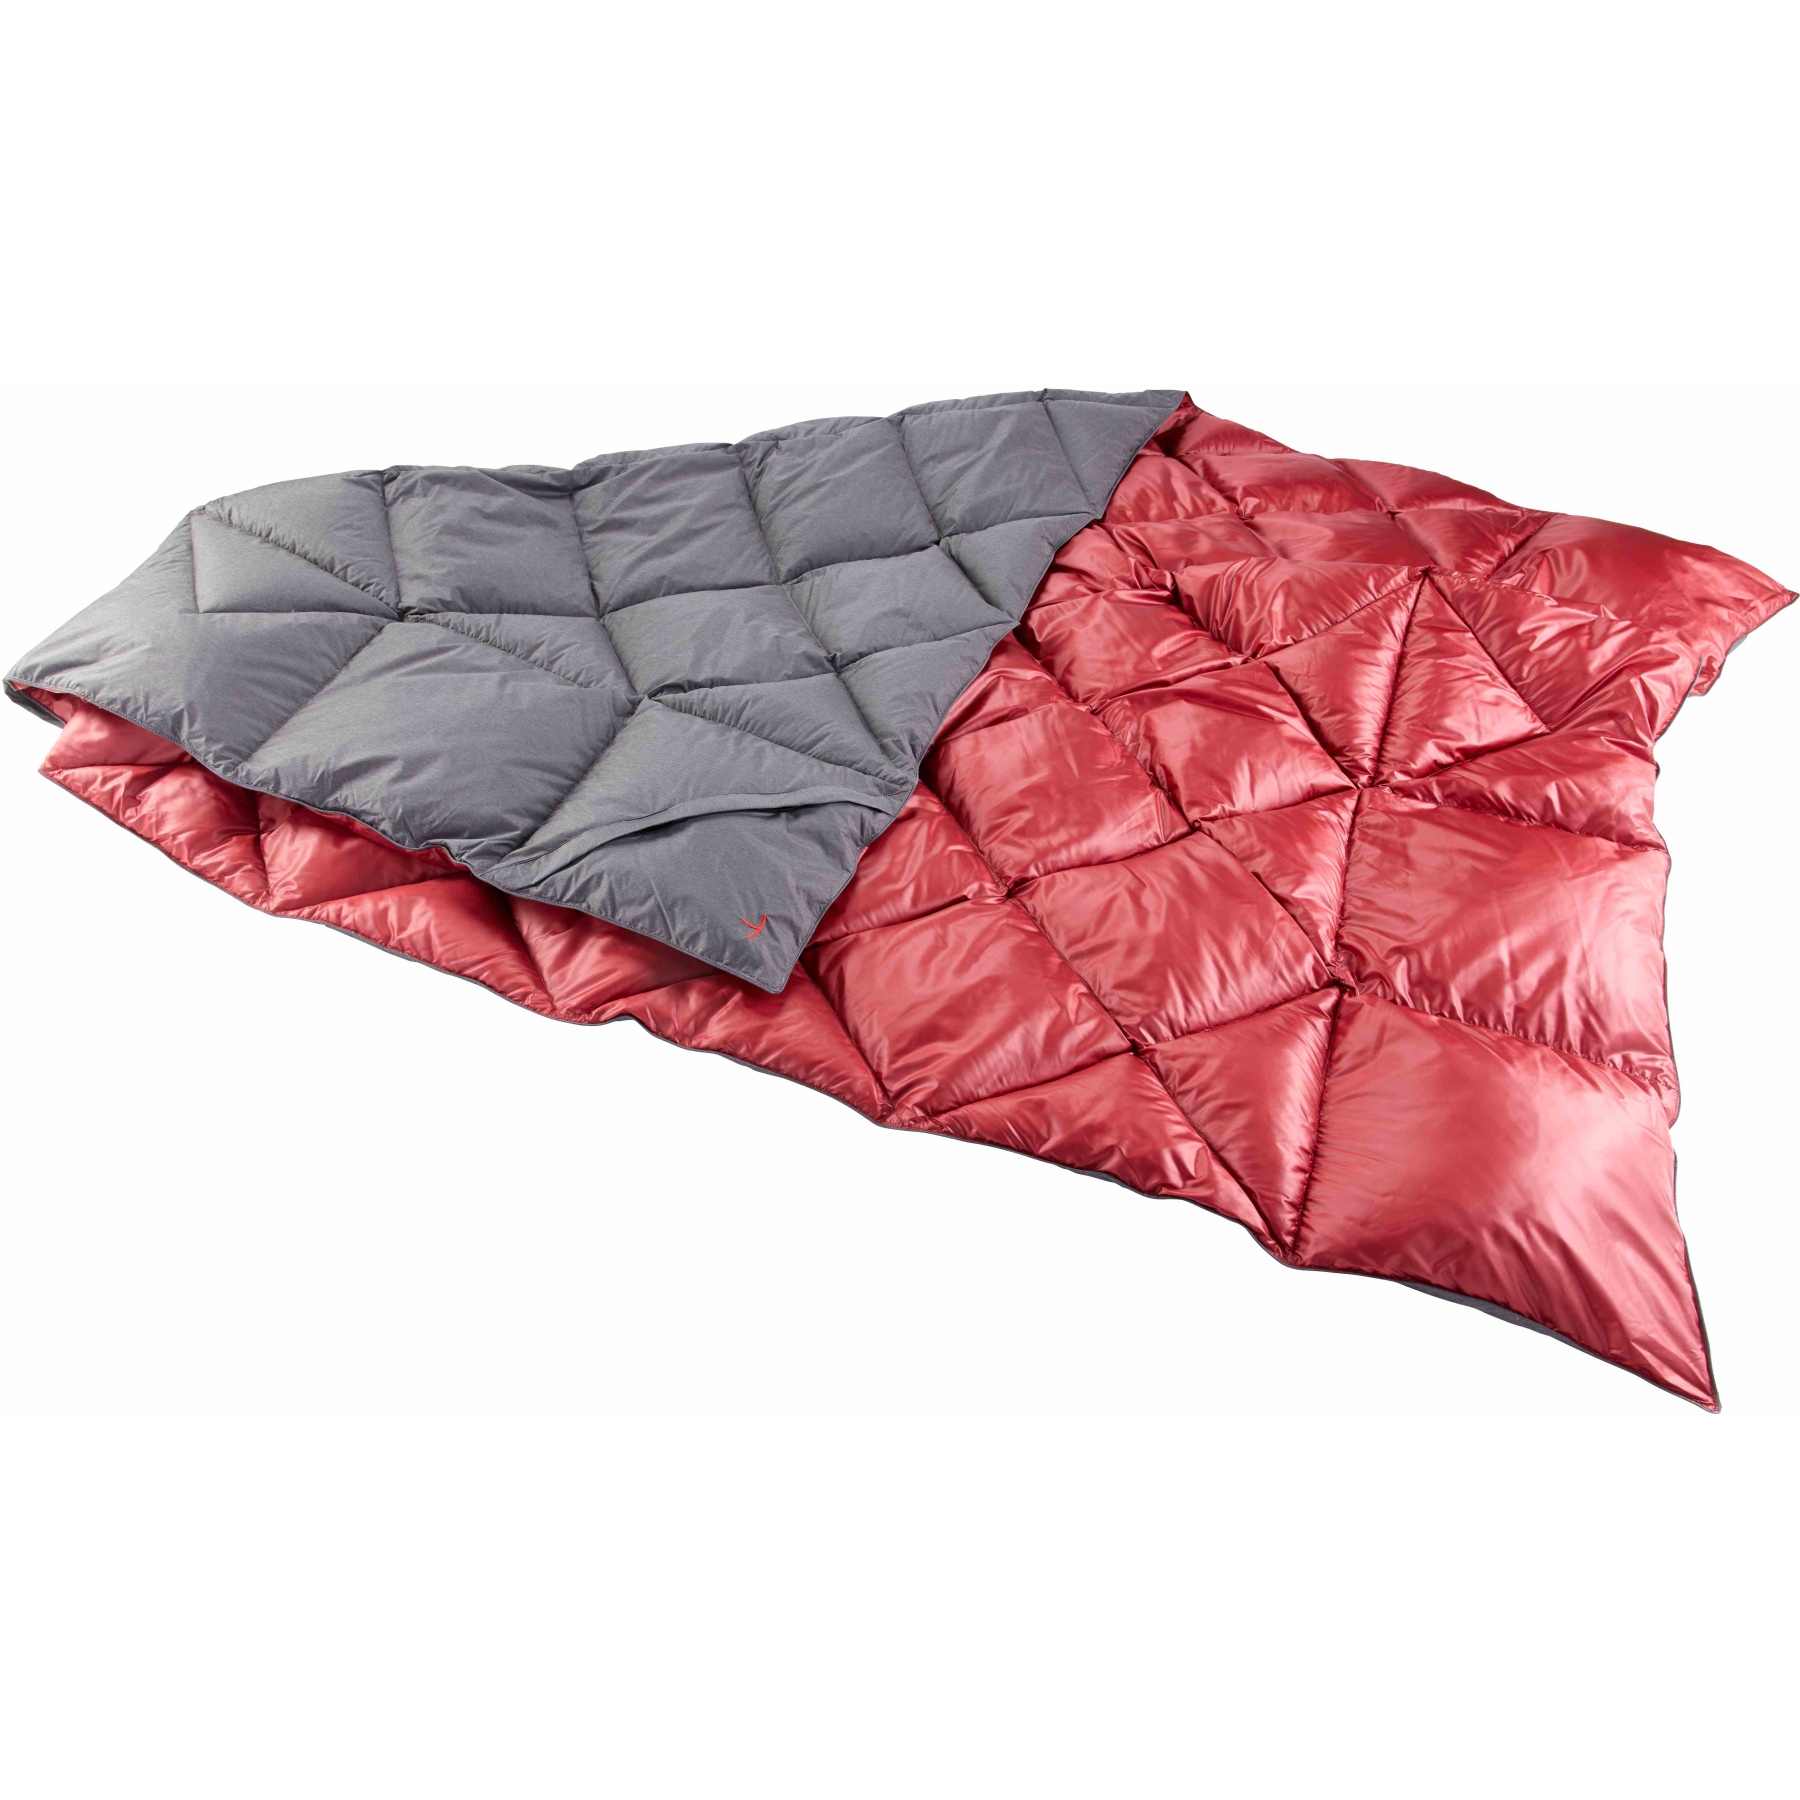 Image of Y by Nordisk Kiby Travel Blanket - coal grey/cranberry red